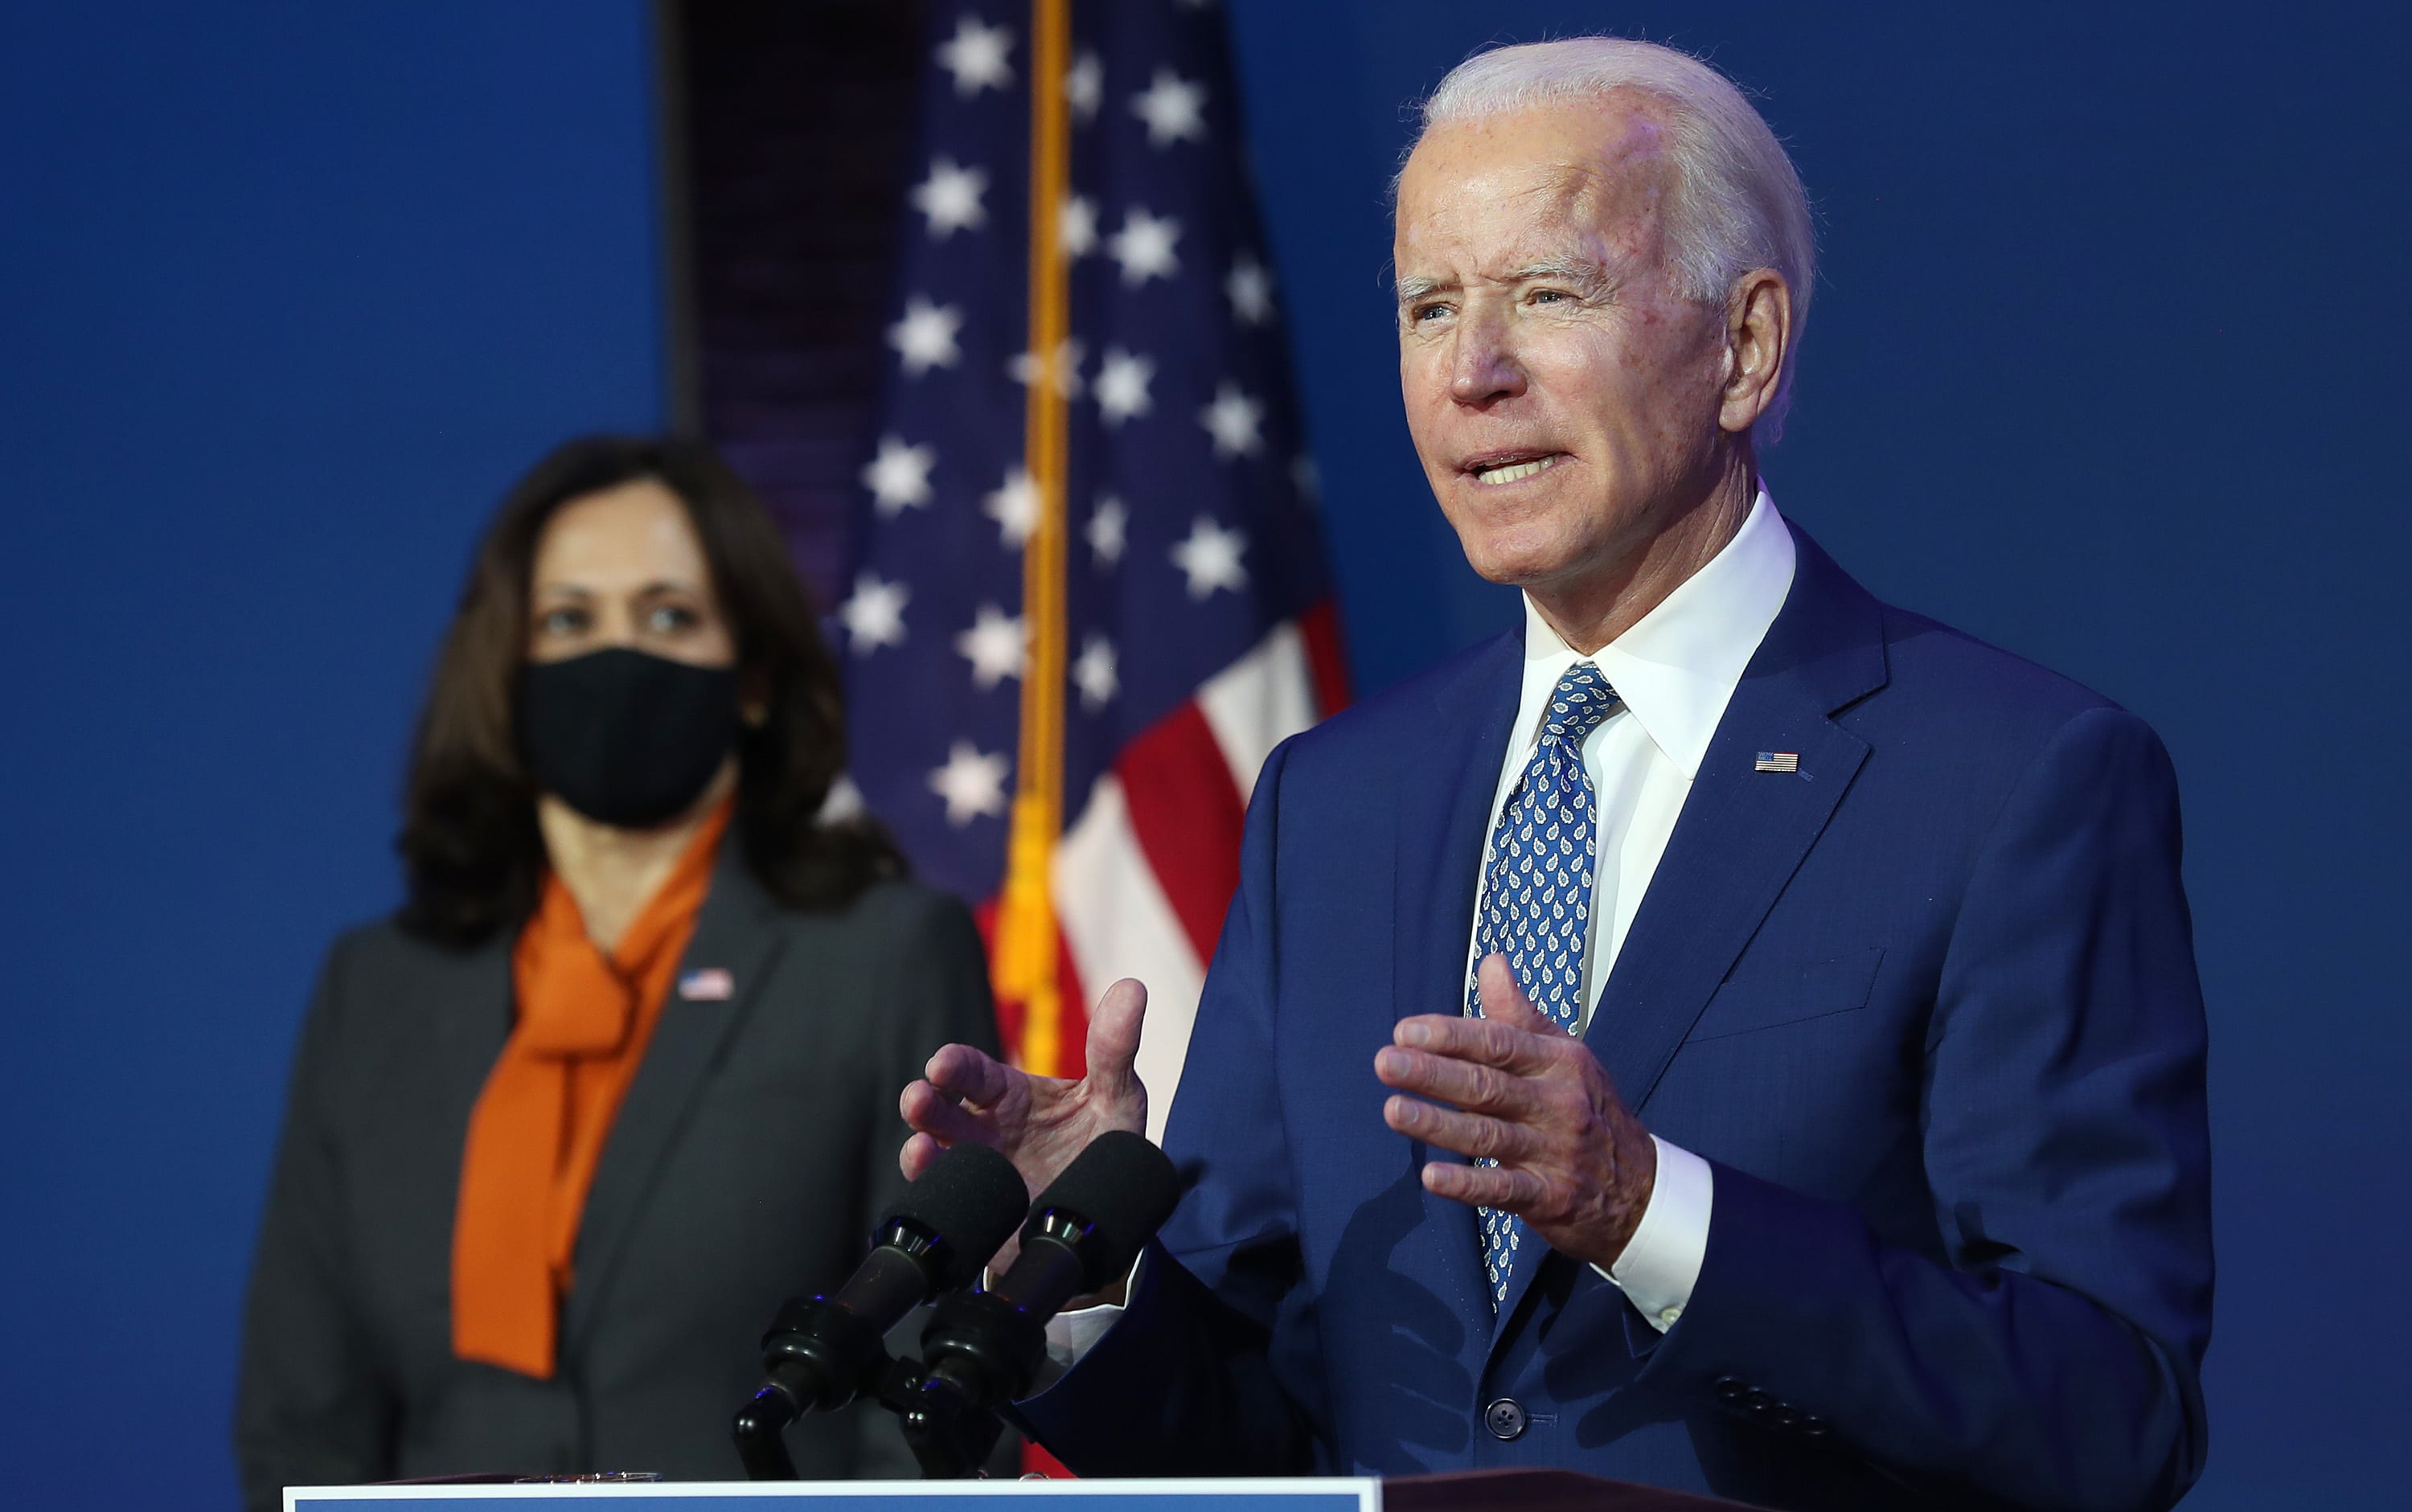 Business leaders tell Congress to certify Biden won election, Trump lost